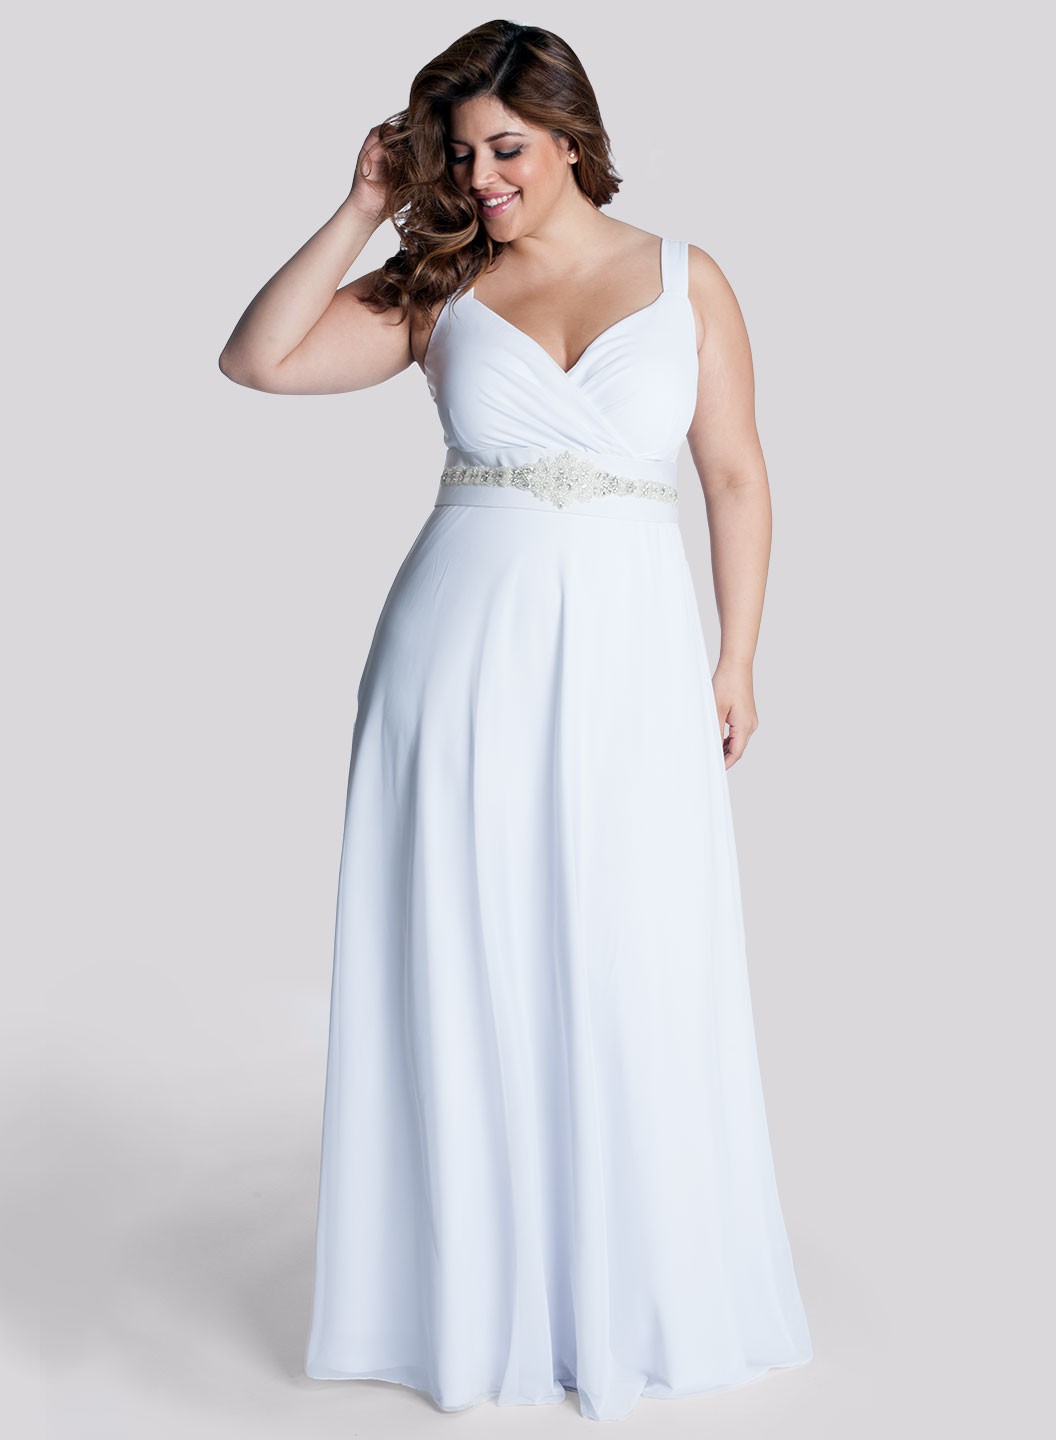 Best Wedding Plus Size Dresses in 2023 The ultimate guide 